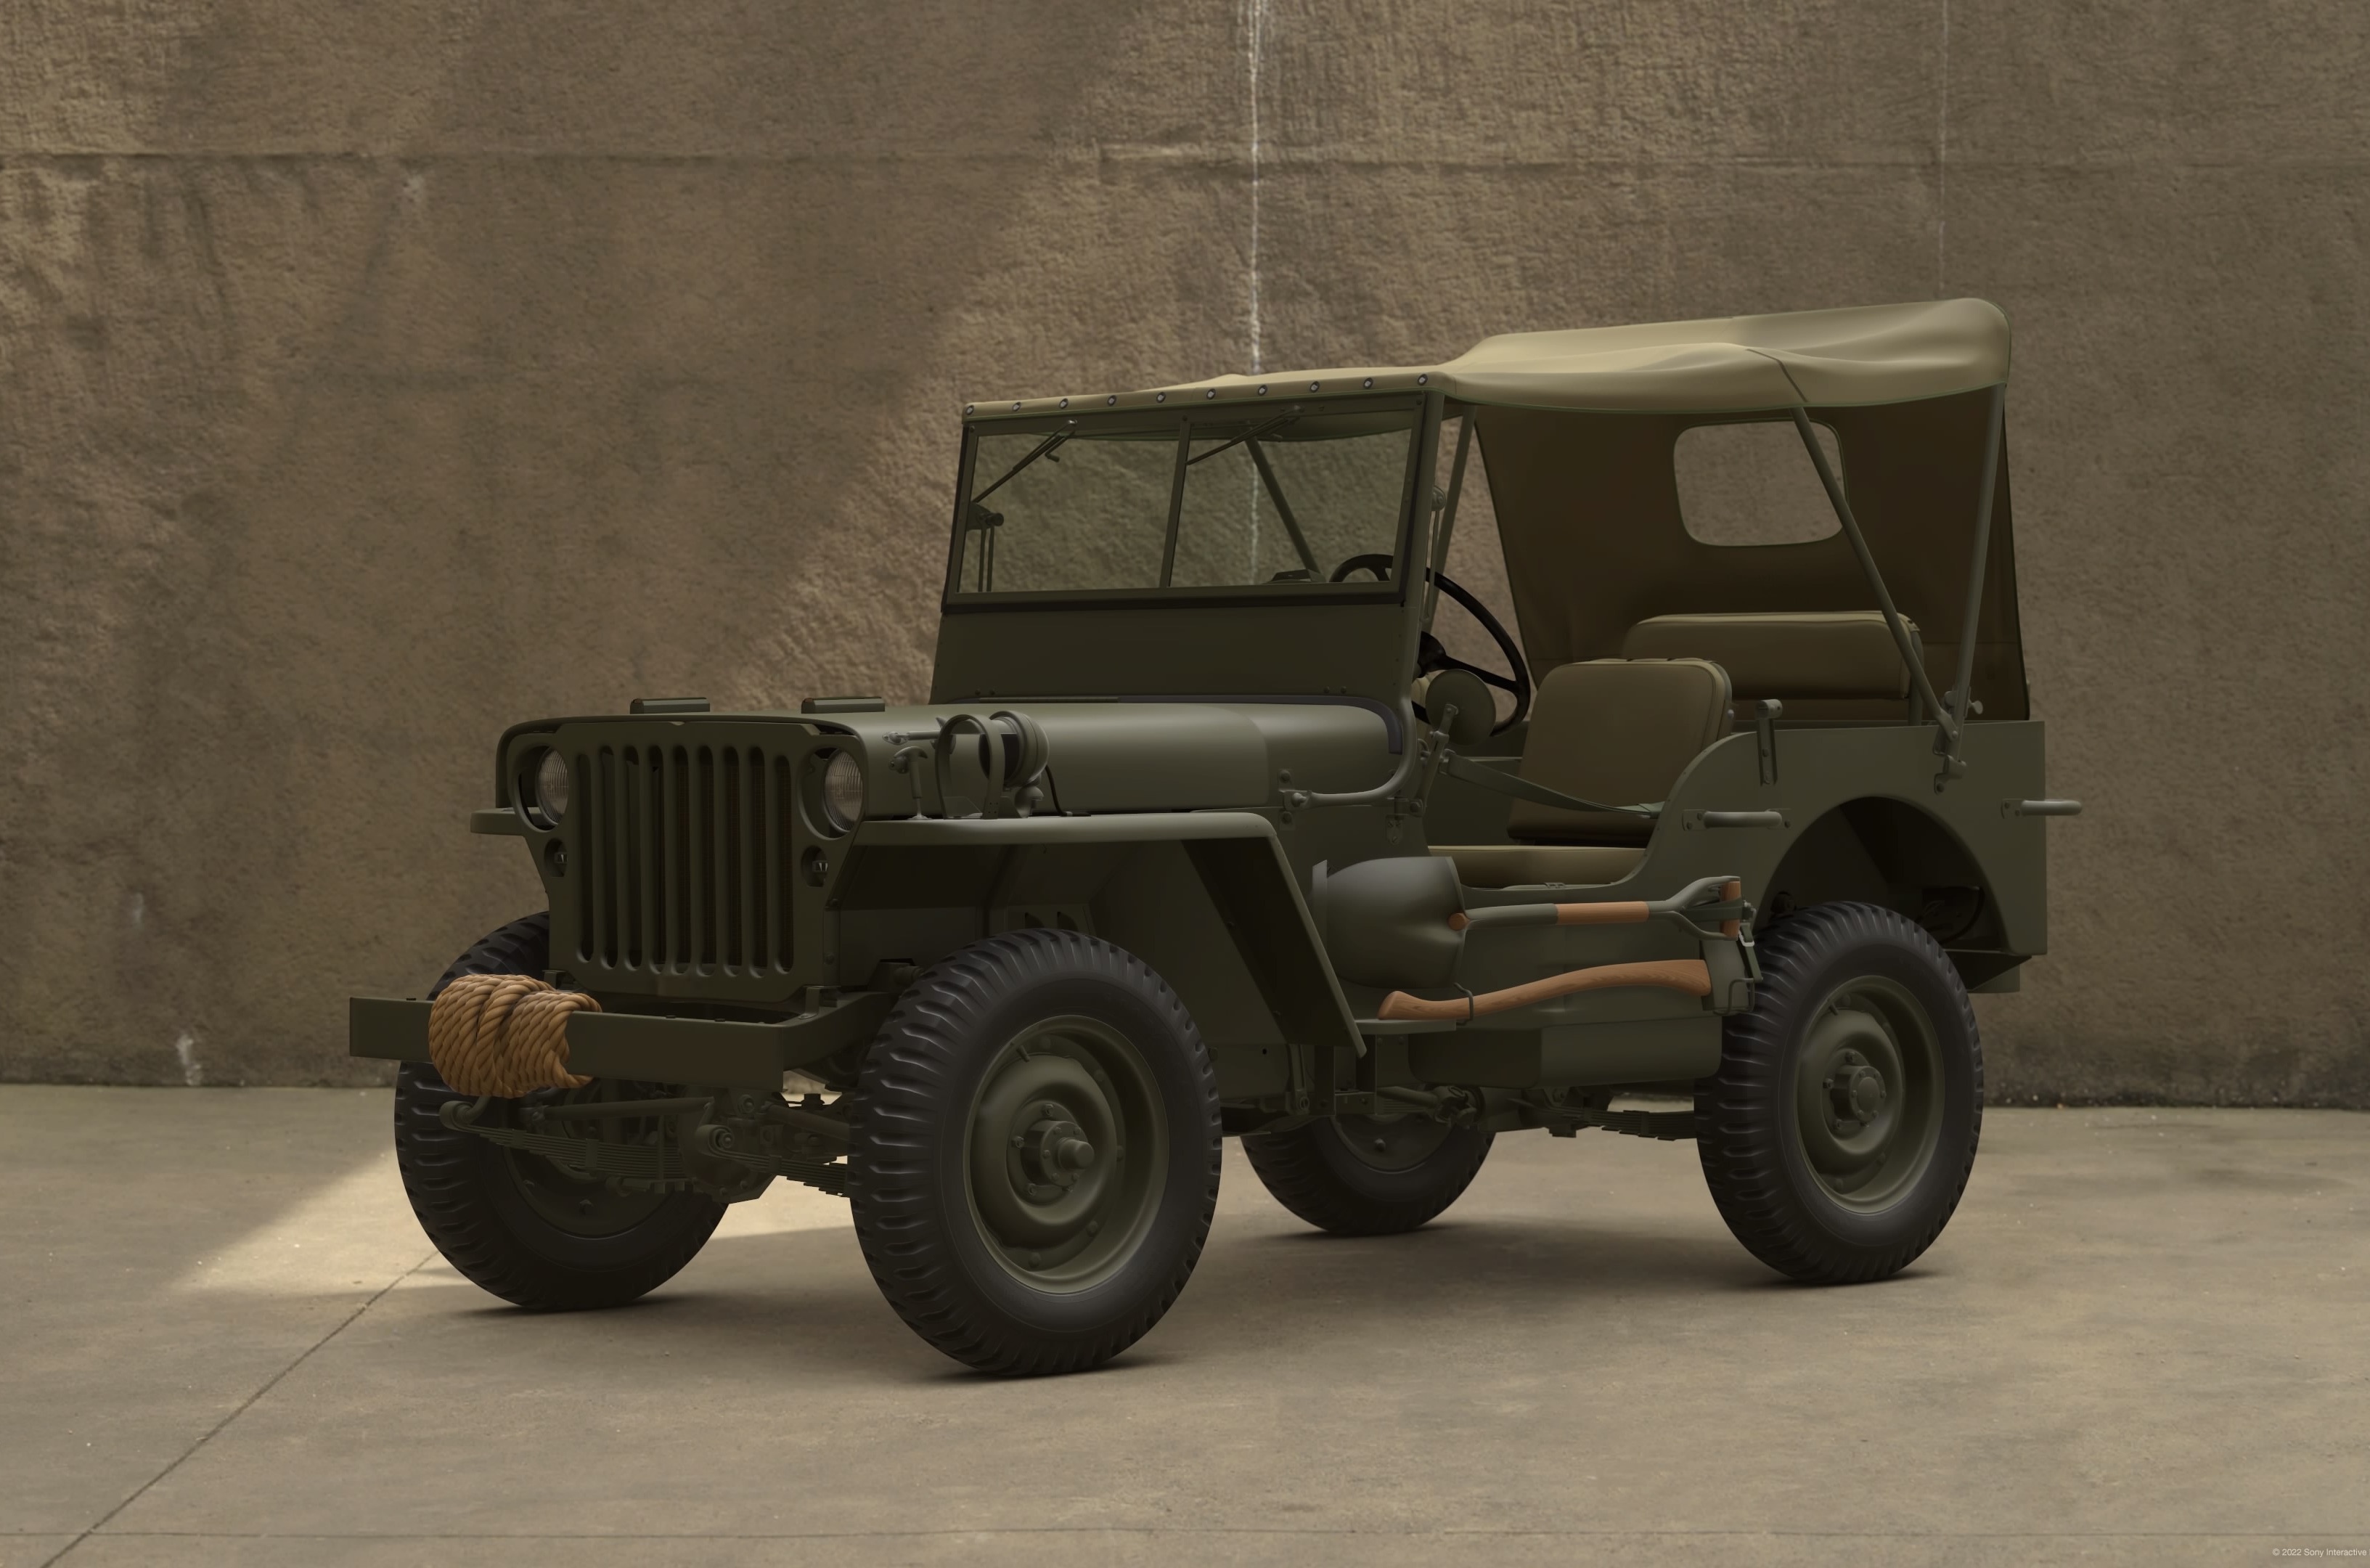 https://static.wikia.nocookie.net/gran-turismo/images/2/29/Jeep_Willys_MB_%2745.jpg/revision/latest?cb=20220401073015